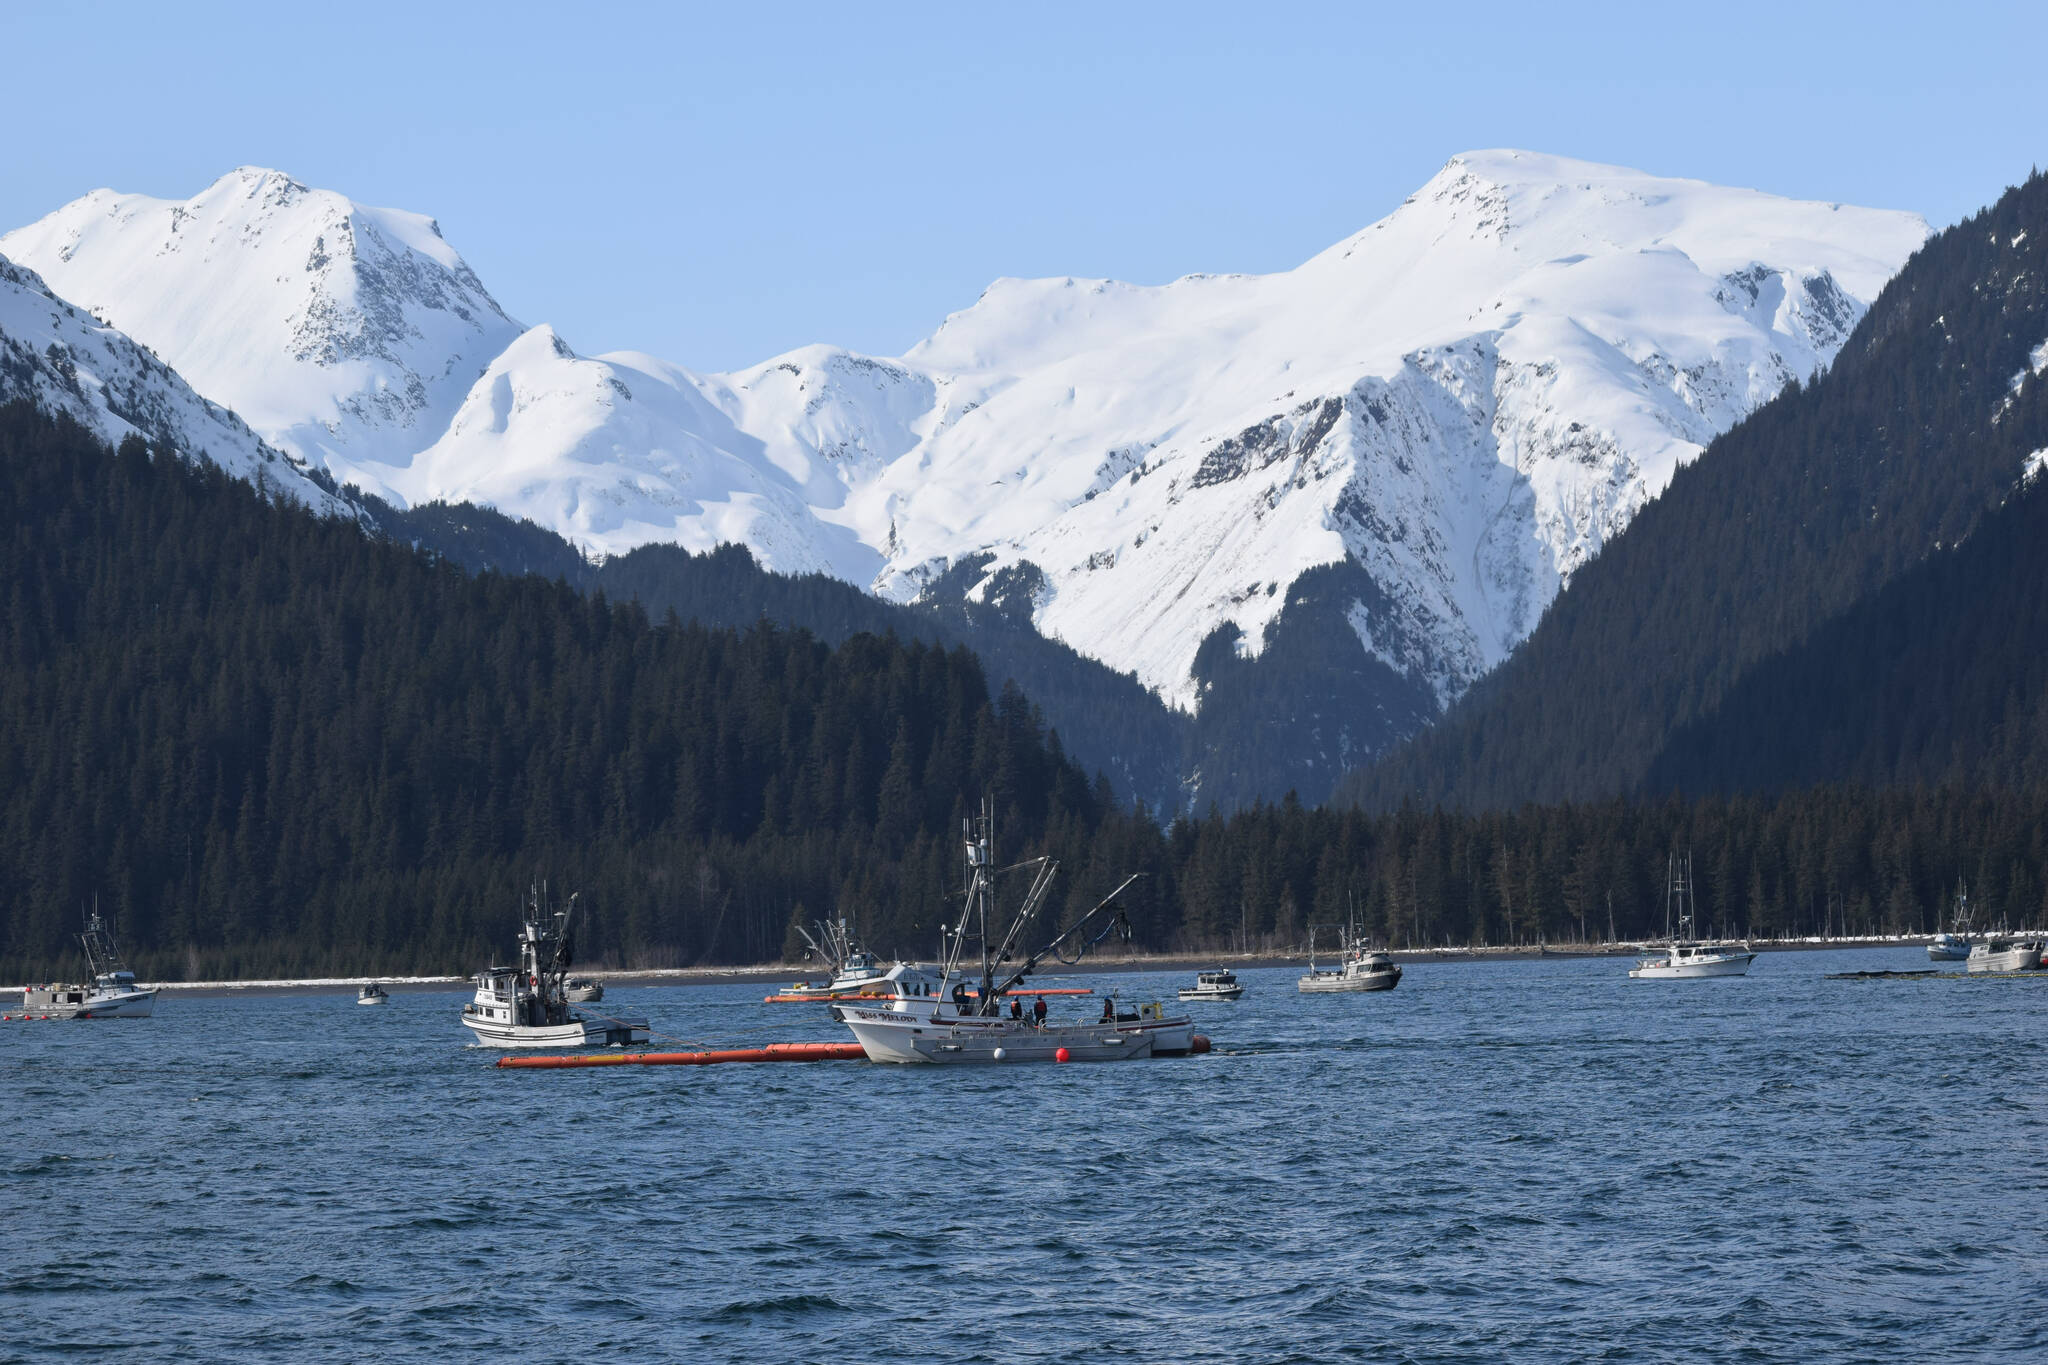 A fishing vessel fleet off the coast of Seward, Alaska, participates in oil spill response training hosted by the Prince William Sound Regional Citizens’ Advisory Council (RCAC), along with members of the Alyeska Pipeline Service Company, on Thursday, April 14, 2022. (Camille Botello/Peninsula Clarion)